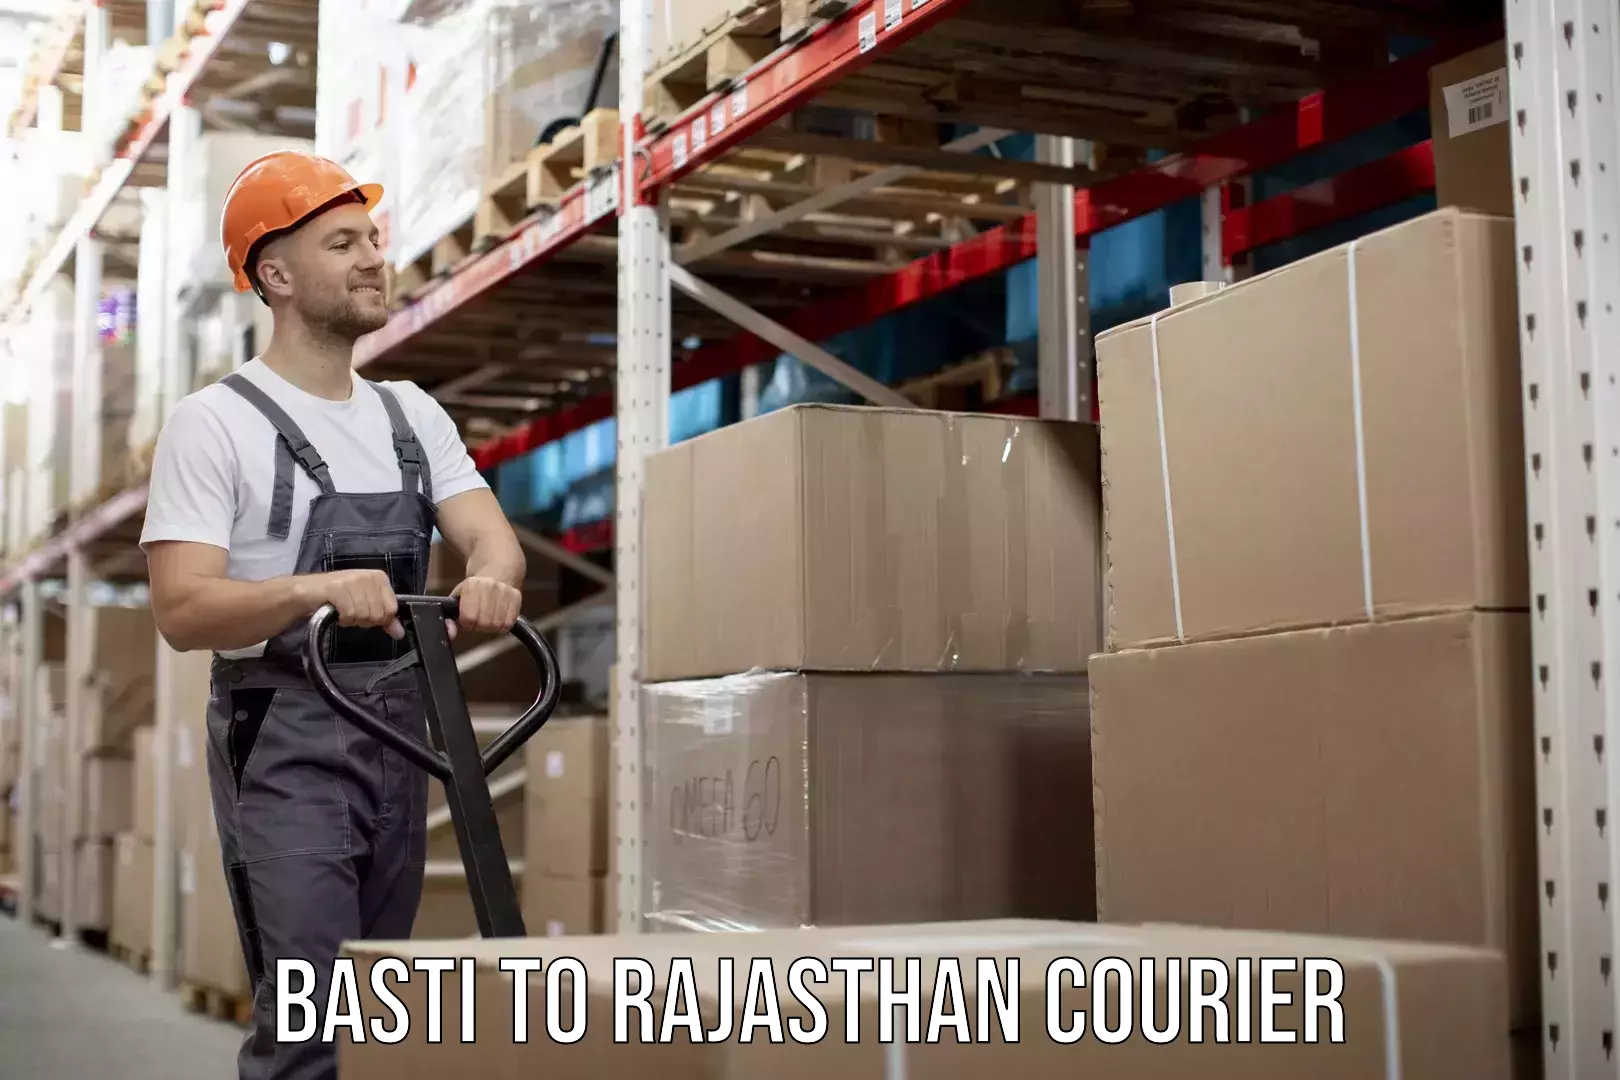 Reliable delivery network Basti to Rajasthan